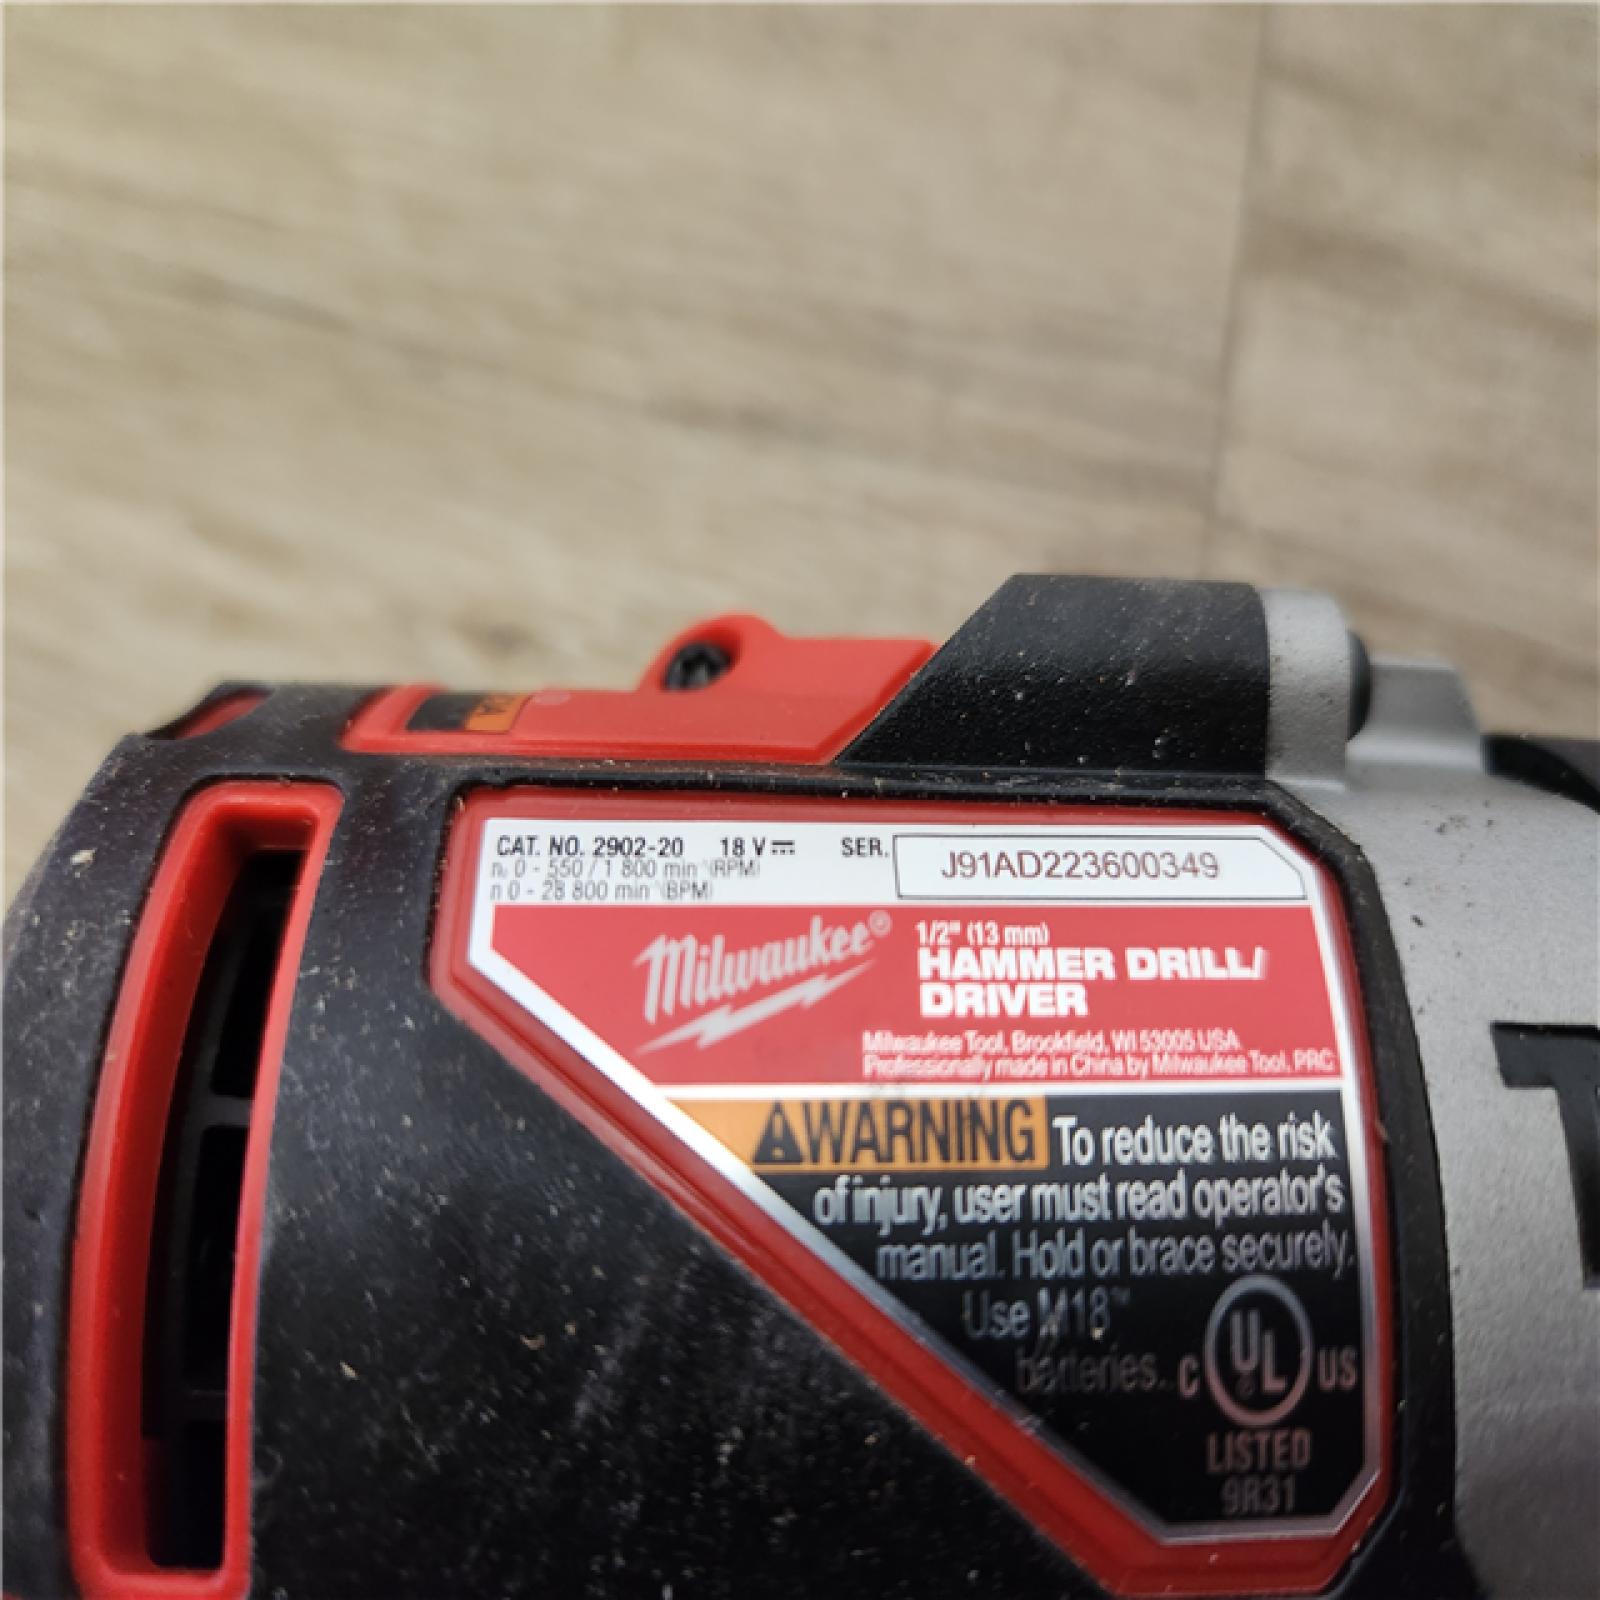 Phoenix Location NEW Milwaukee M18 FUEL 18-V Lithium-Ion Brushless Cordless Hammer Drill and Circular Saw Combo Kit With 2 M18 xc4.0 Lithium Batteries and Charger